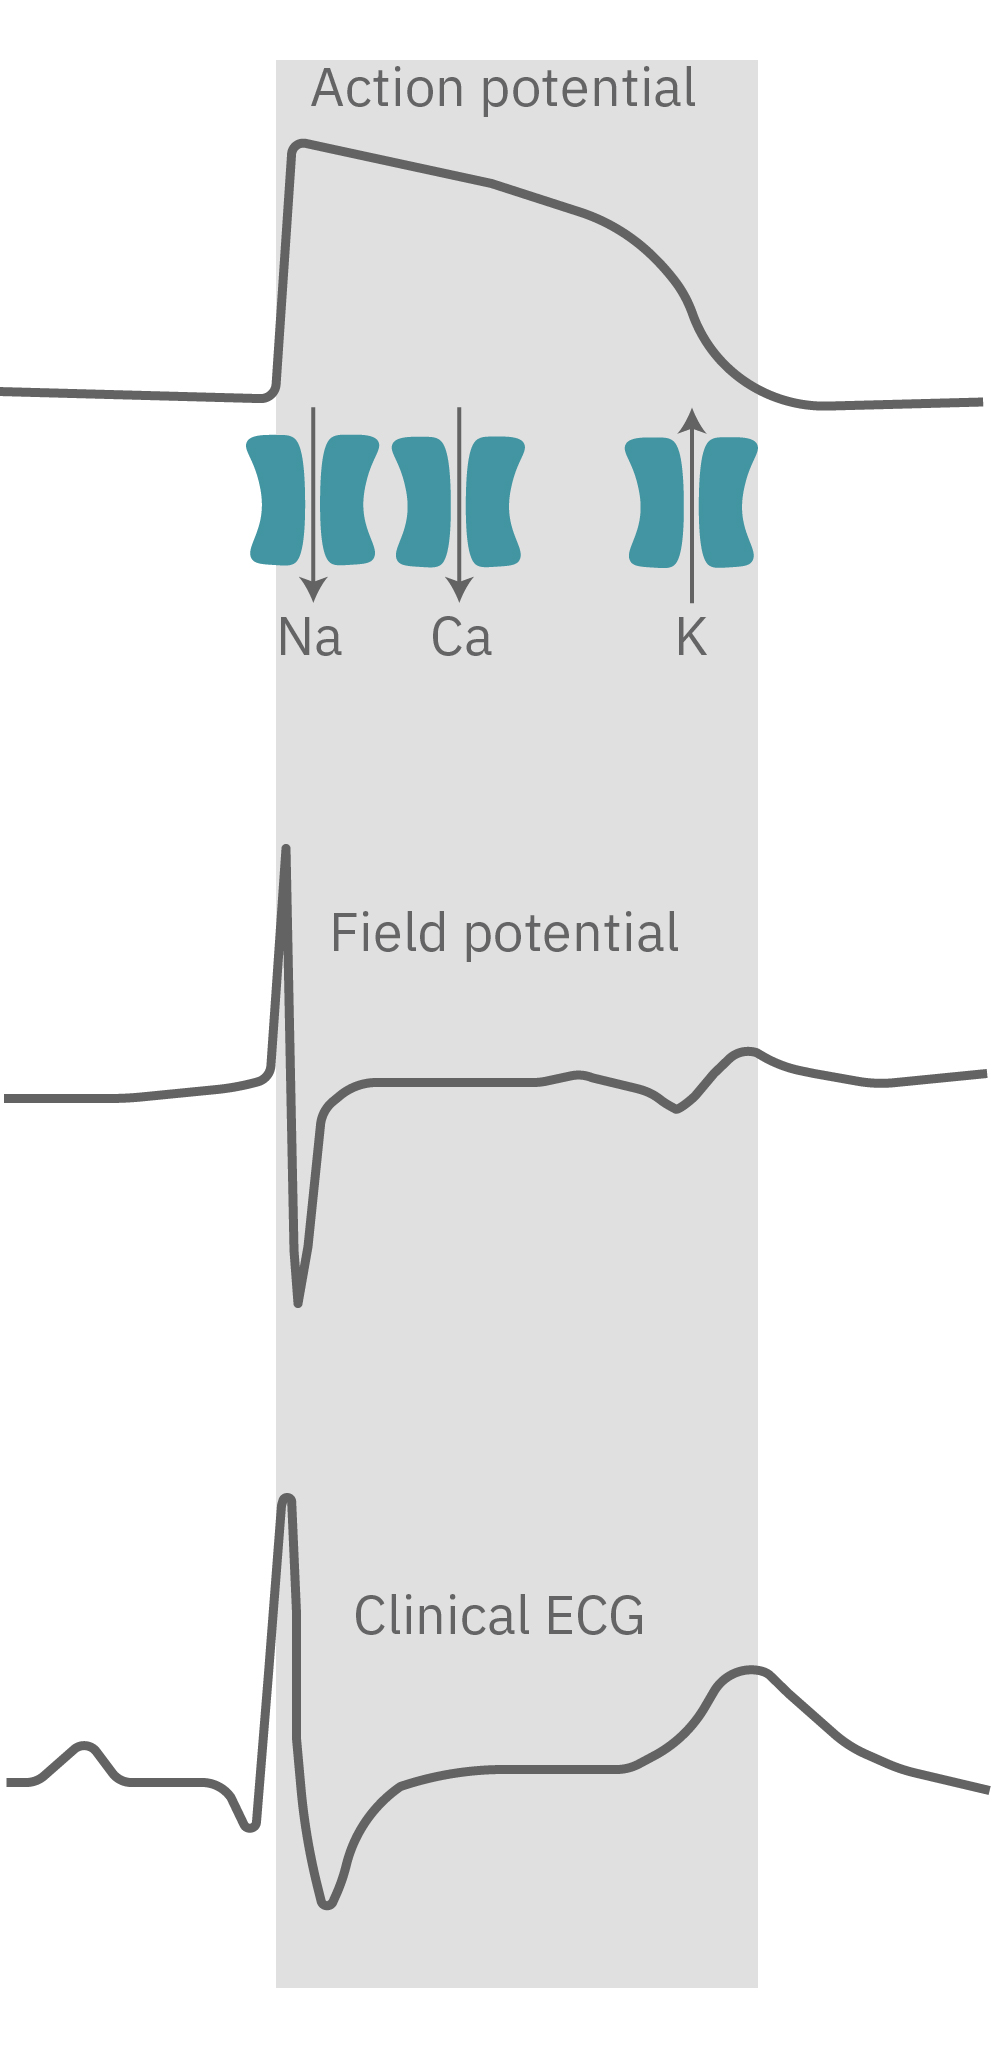 Cardiac Action potential propogates across the cells in the syncytium.